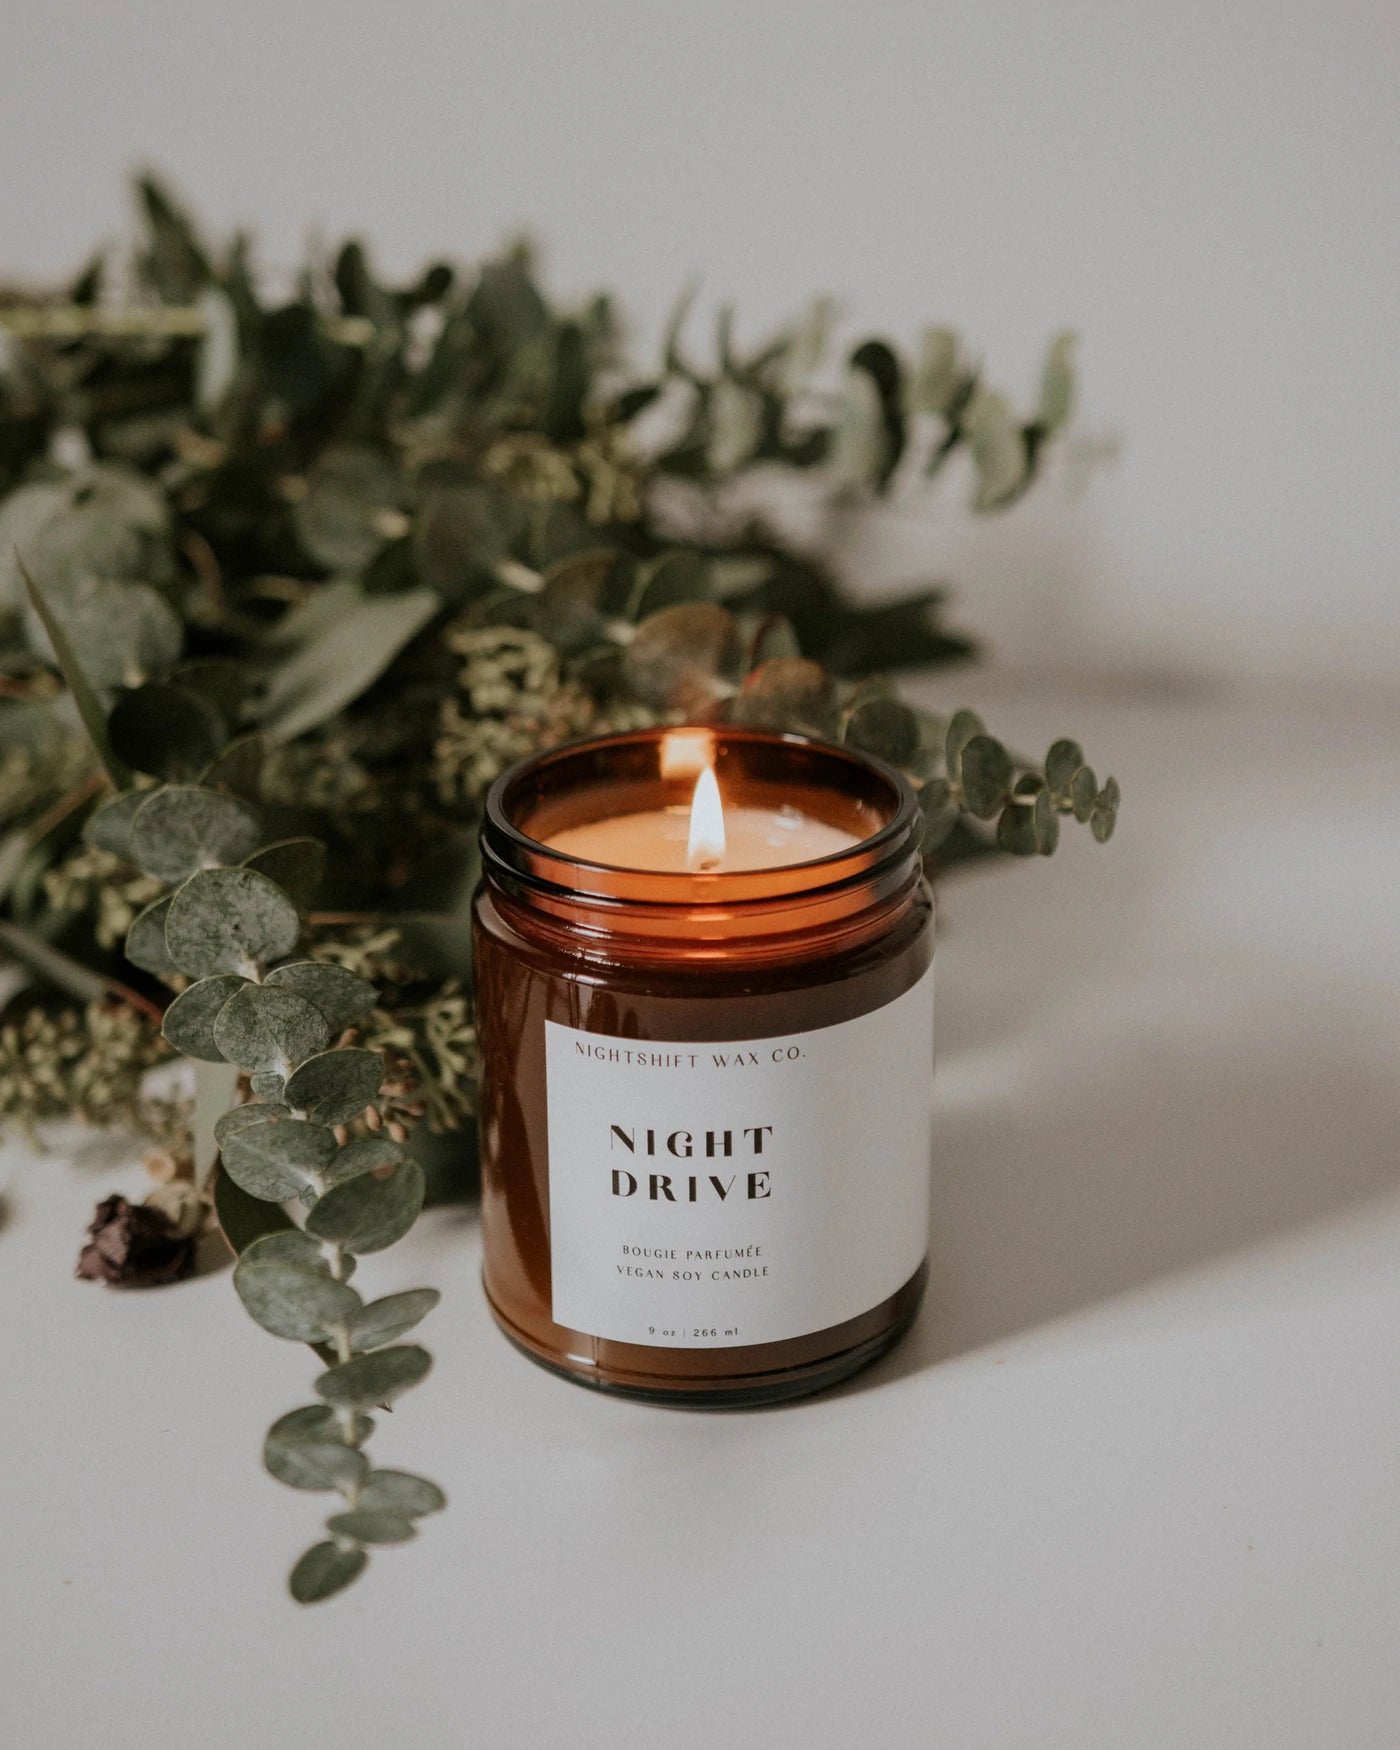 Nightshift Wax Co. Night Drive Soy Candle | Prelude & Dawn | Los Angeles, CA